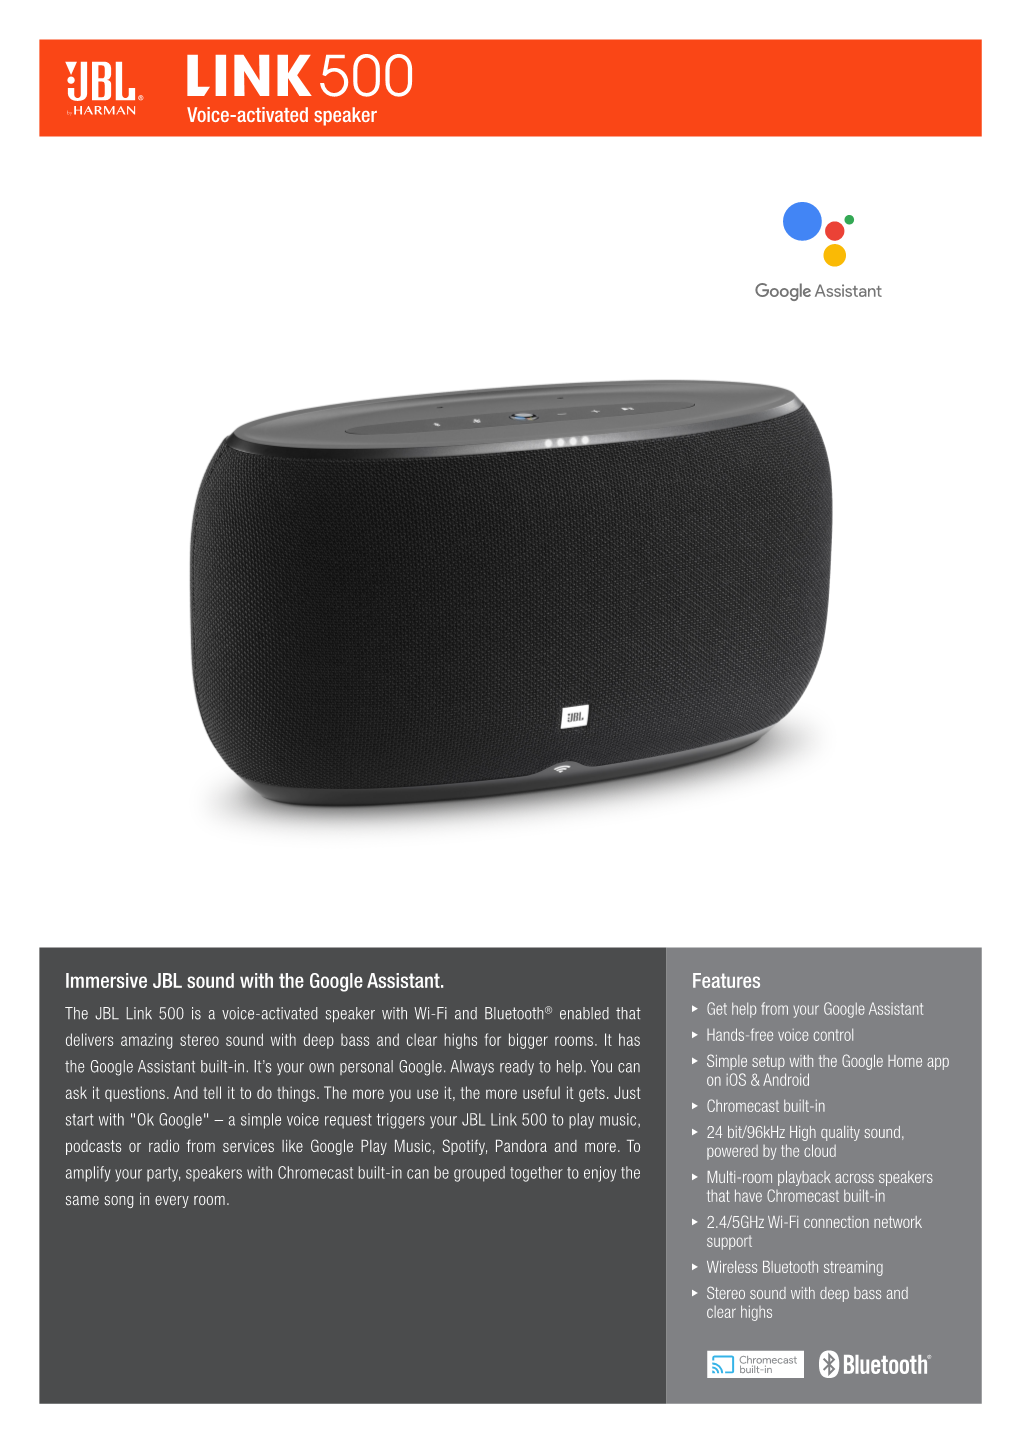 Features Immersive JBL Sound with the Google Assistant. Voice